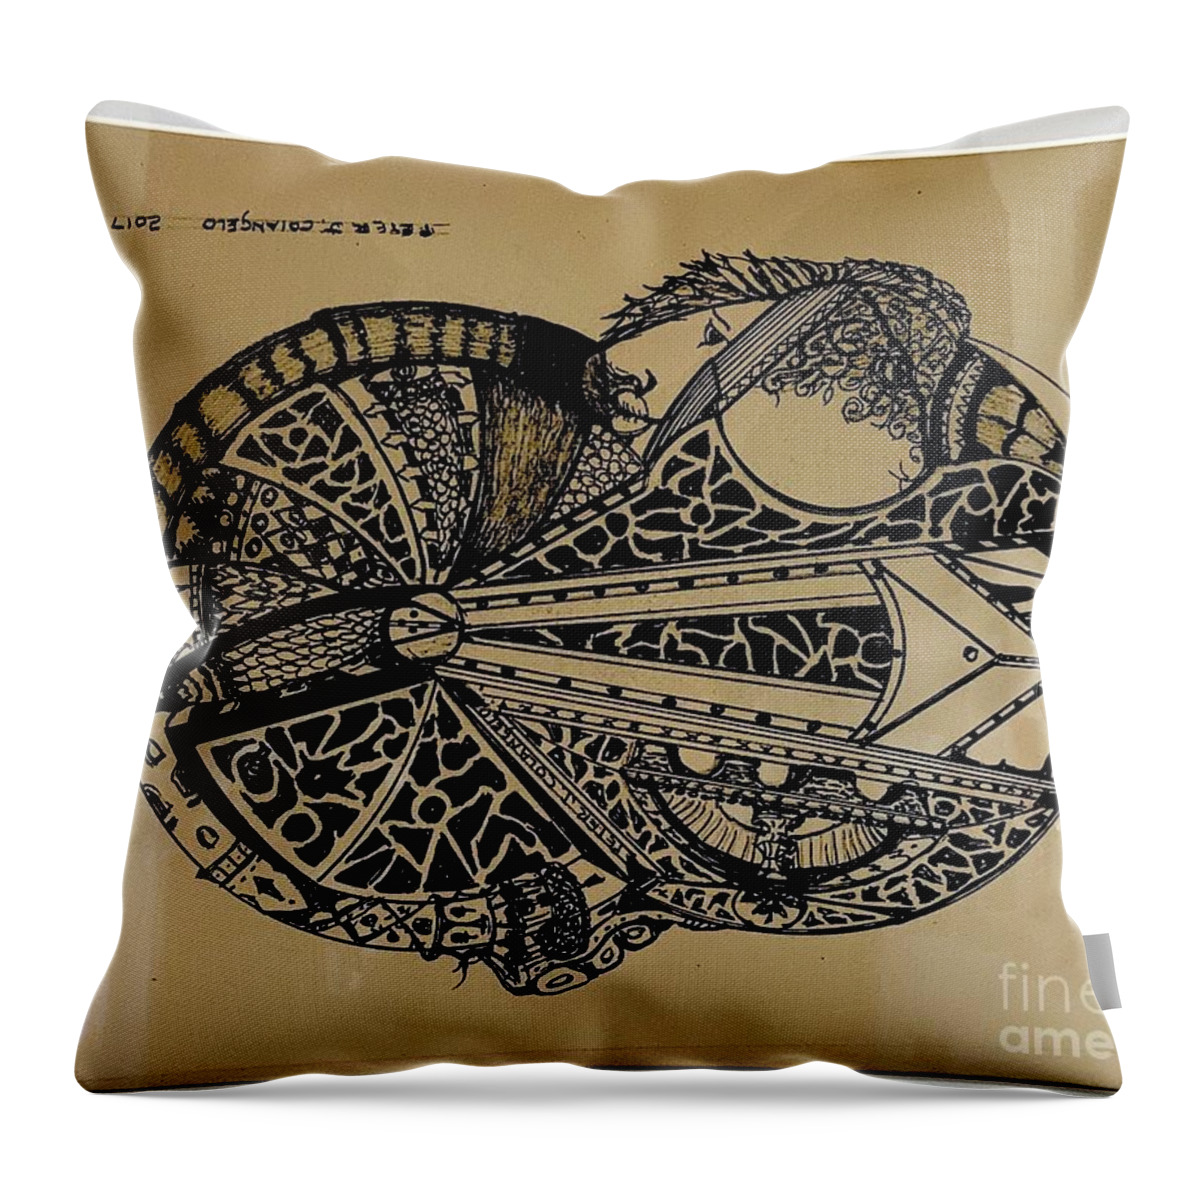  Throw Pillow featuring the drawing Pjc Soc #9 by Peter Colangelo